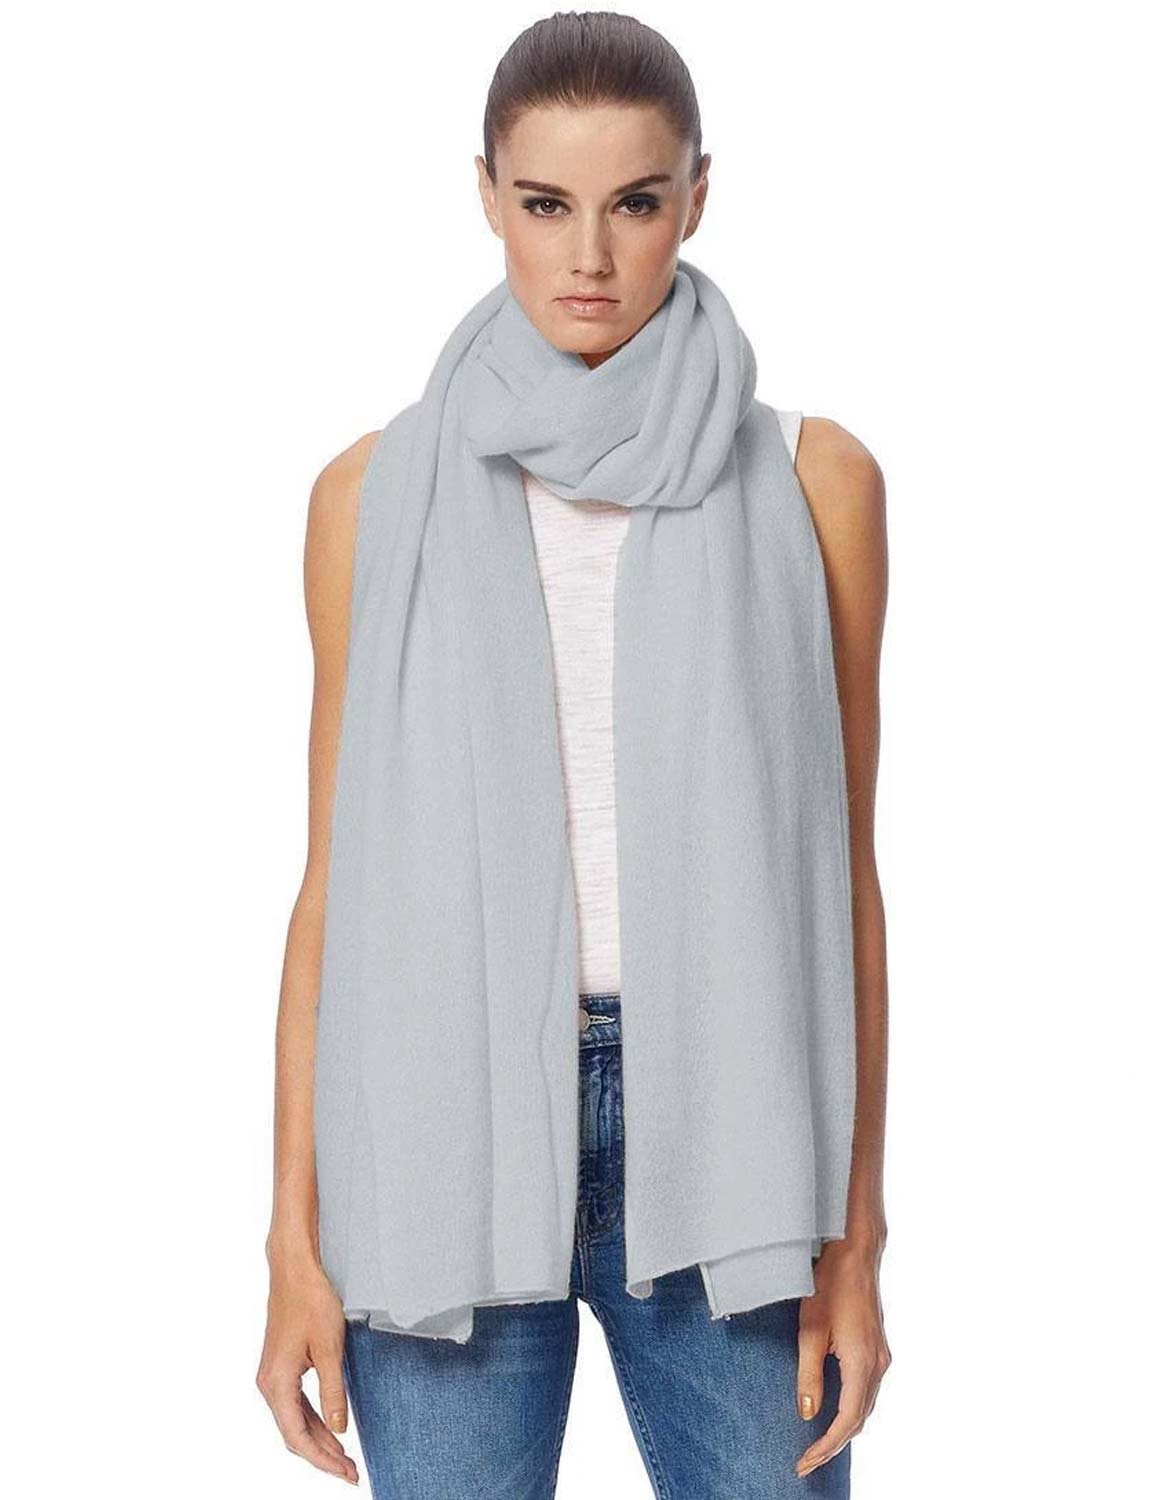 Feather & Stitch | Linus scarf - teal